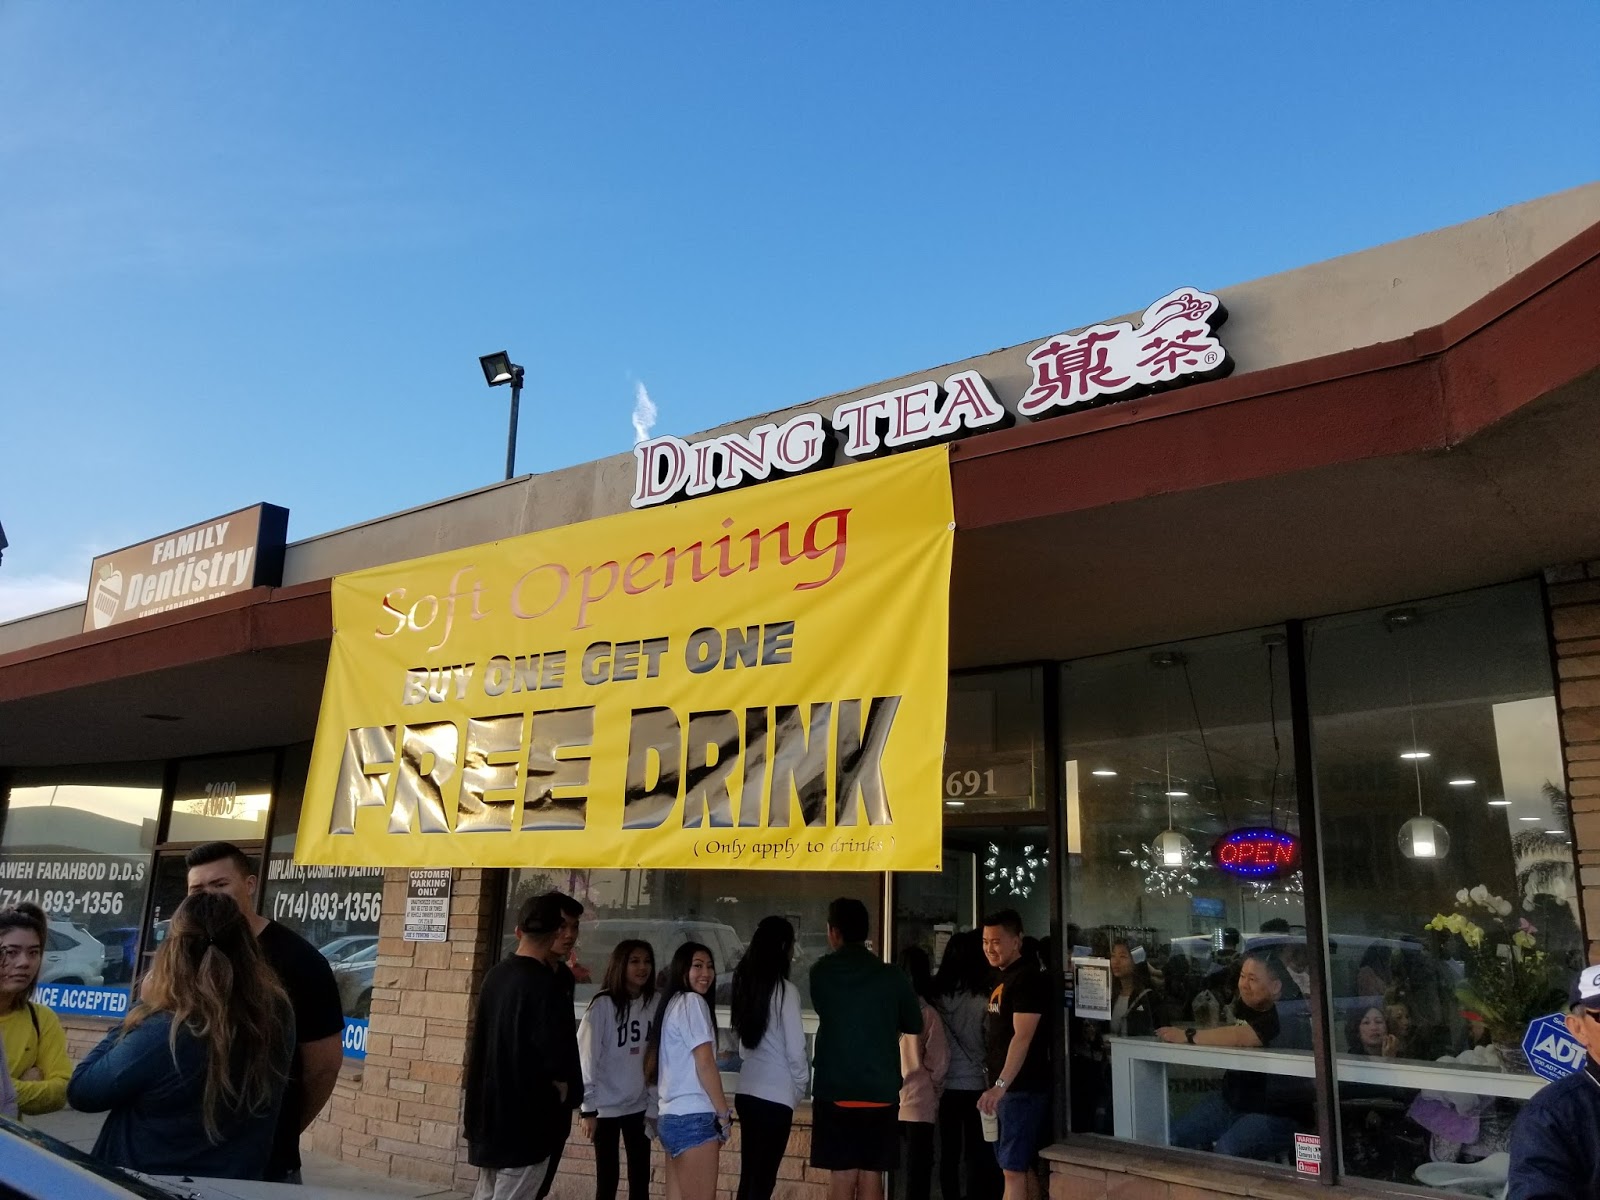 Recap of Ding Tea's Grand Opening in Westminster - That Line Was